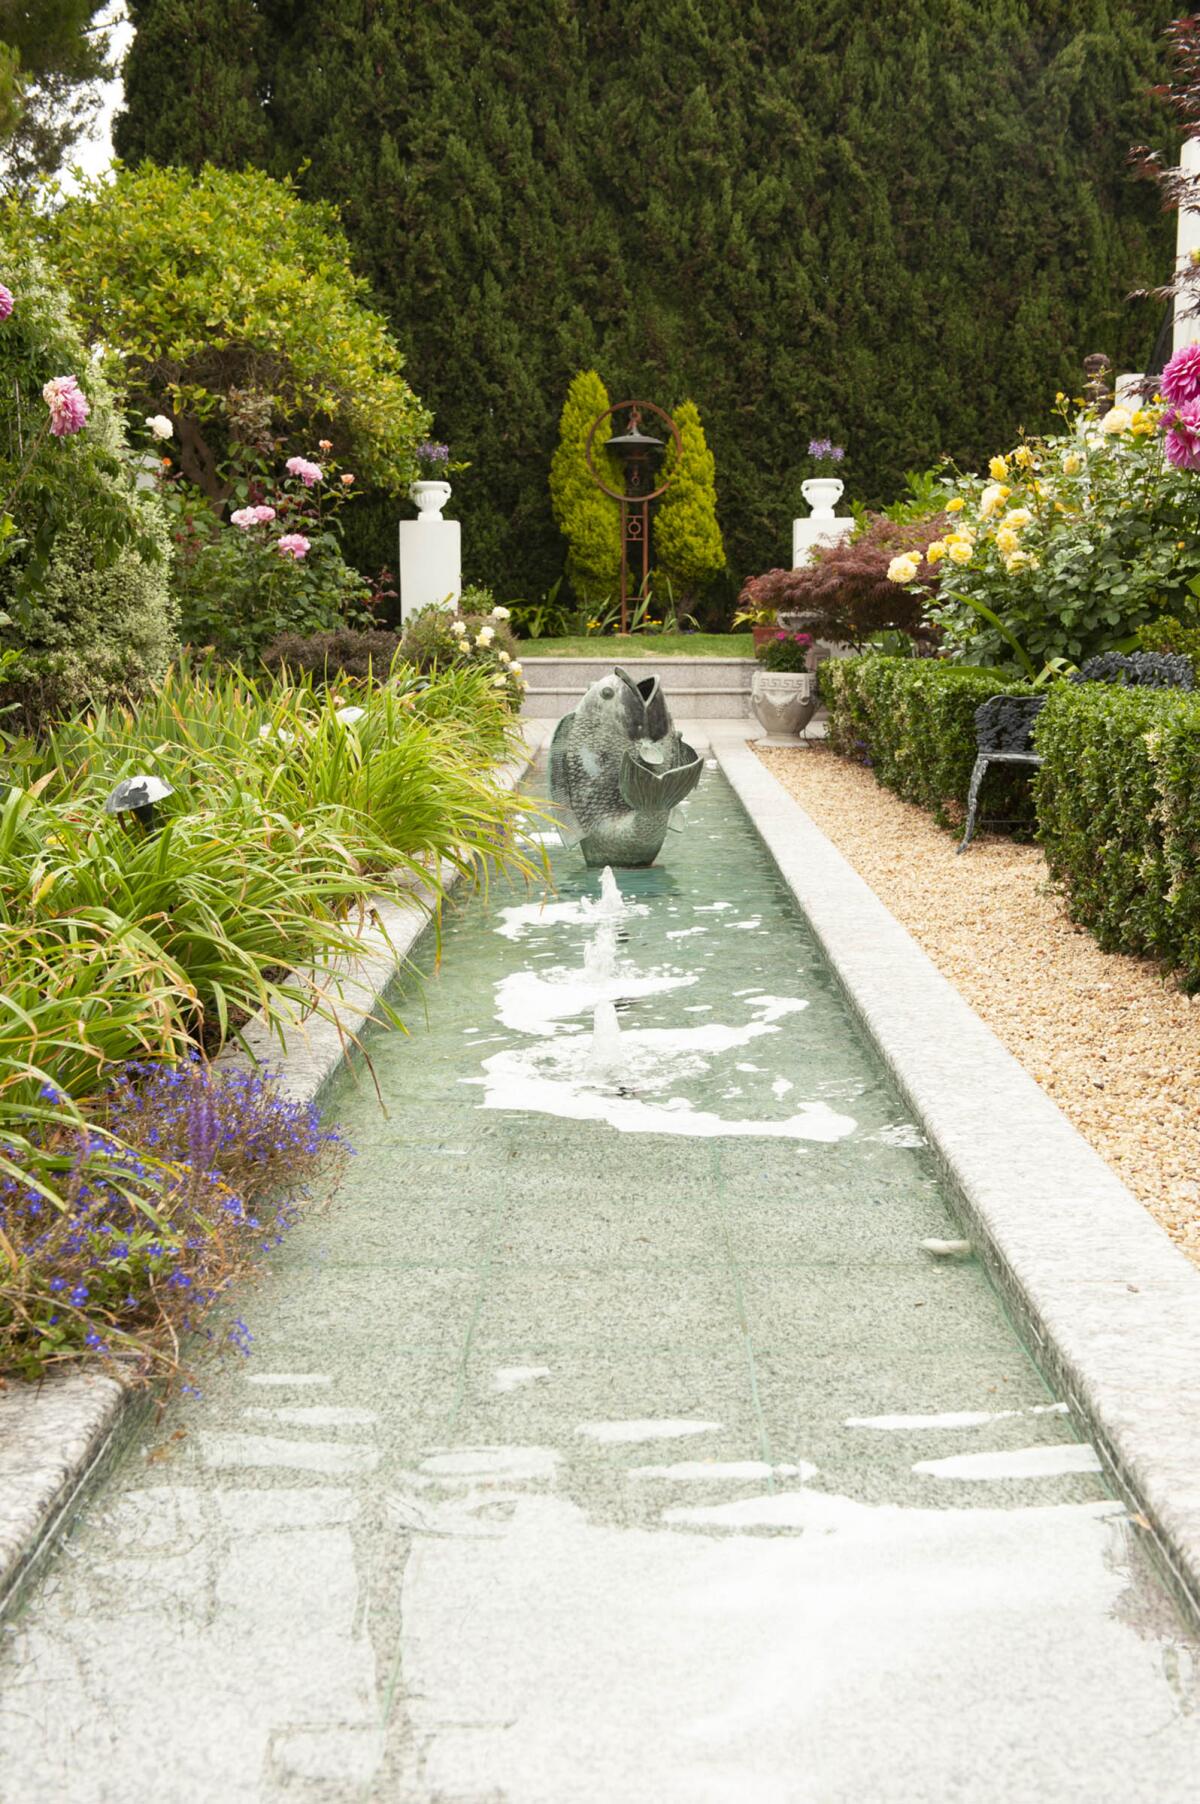 A garden in the 2020 tour, featuring a fountain and pool in an Italian-inspired garden.